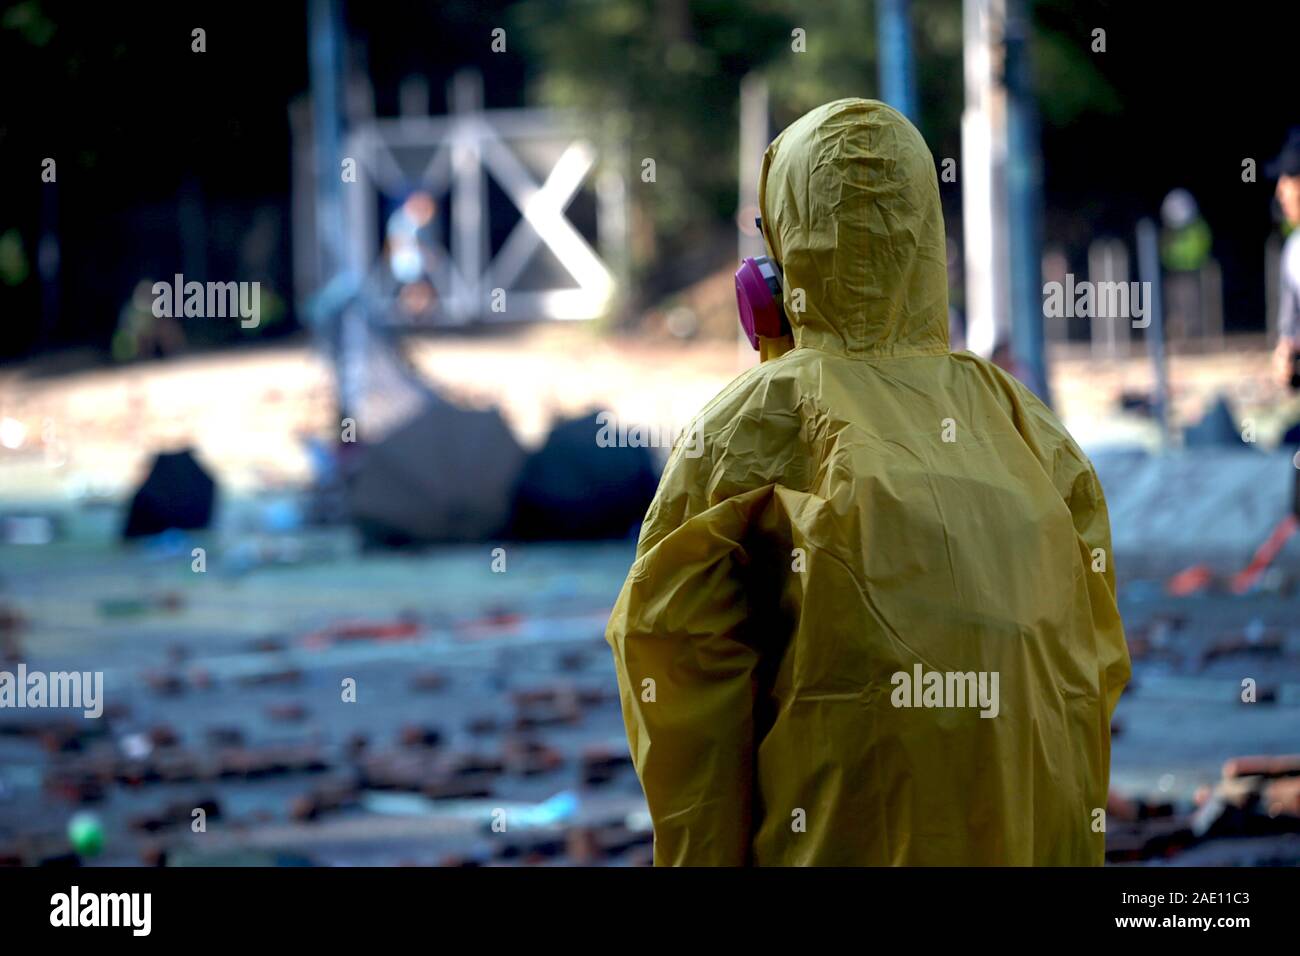 A protestor wearing a yellow rain jacket and tear gas mask examines the scene at Polytechnic, with the ground dyed blue and littered with bricks. Stock Photo